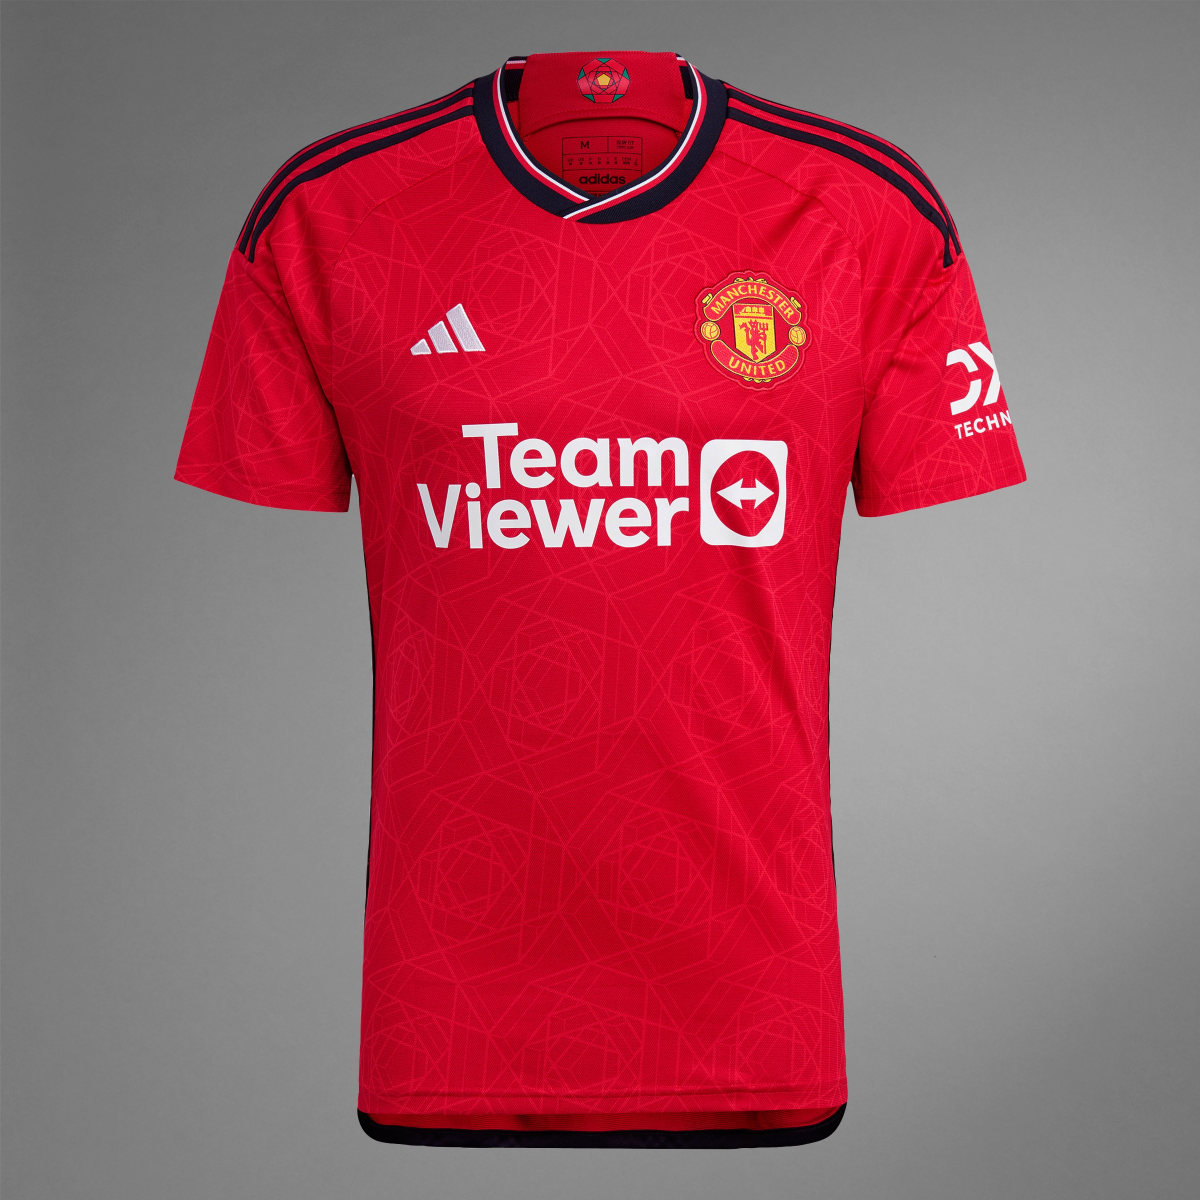 Adidas Maillot Domicile Manchester United 23/24. 10